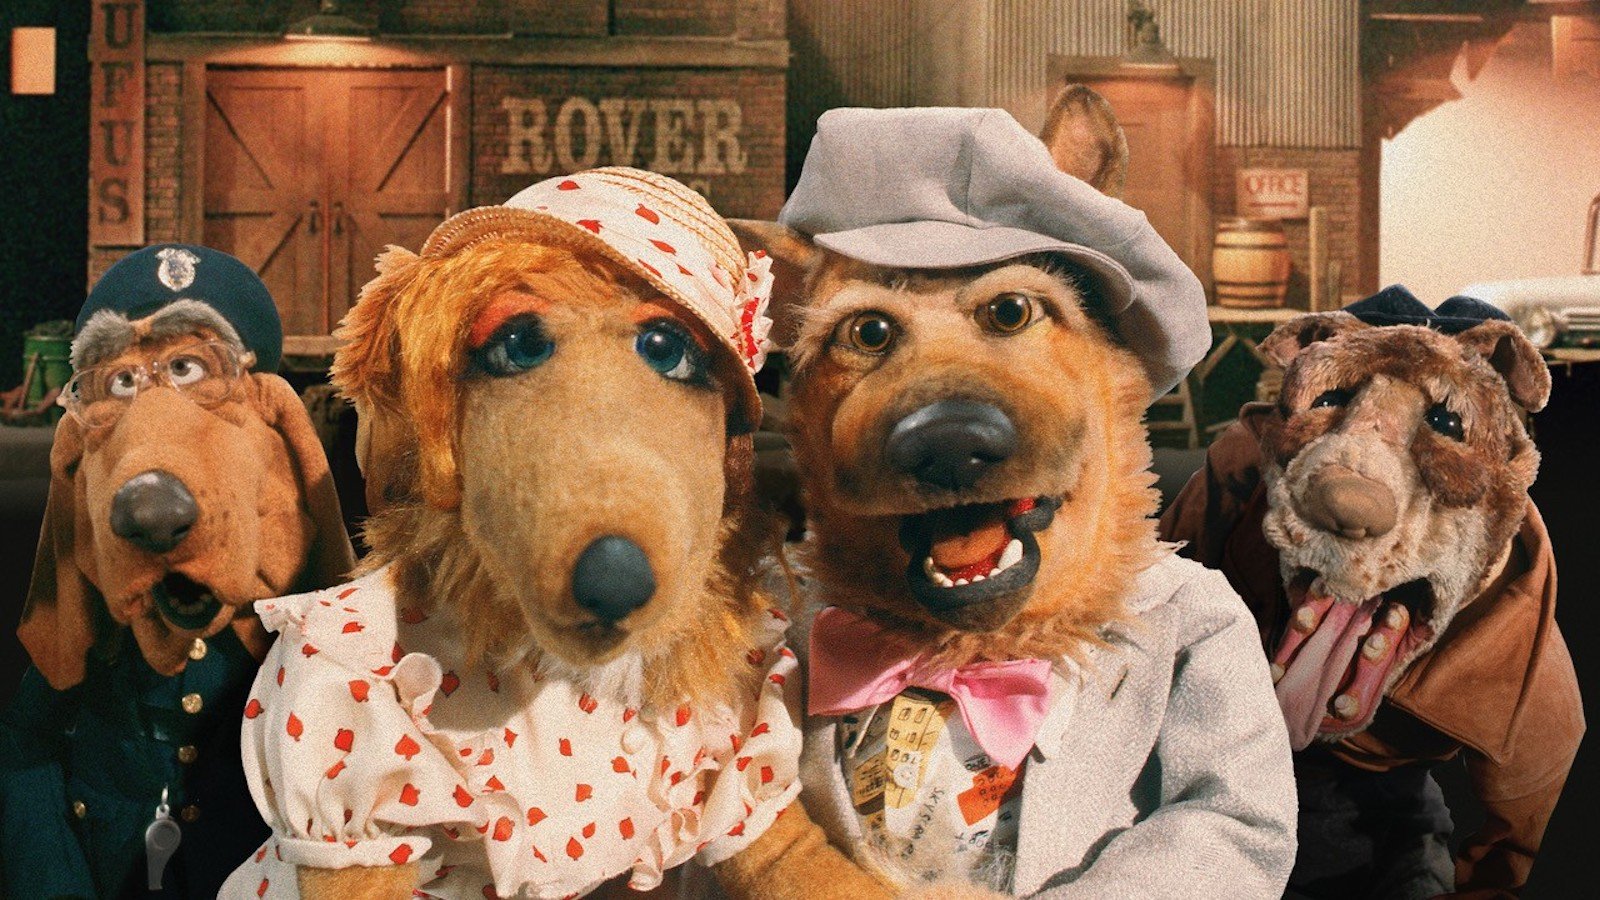 Four puppet dogs dressed in human clothes and hats look at the camera, smiling.